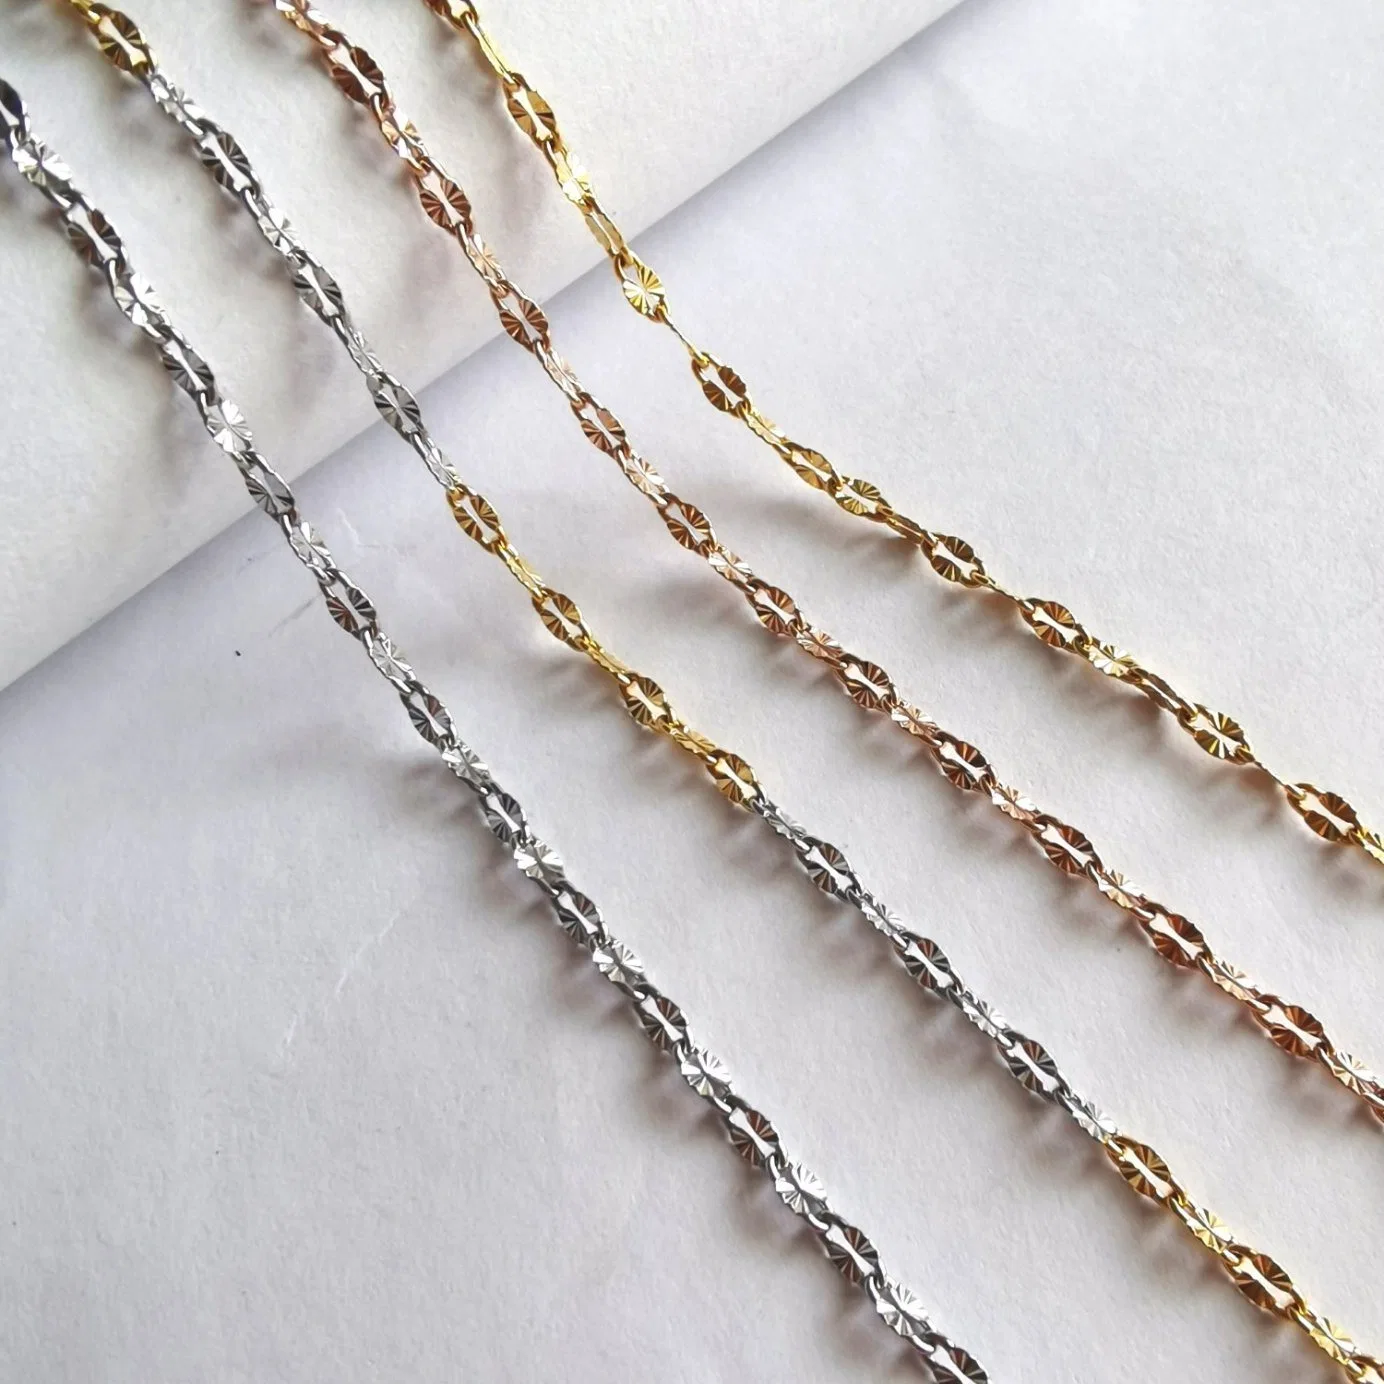 Factory Lip Chain Accessories Necklace Jewelry Embossed Fashion Design